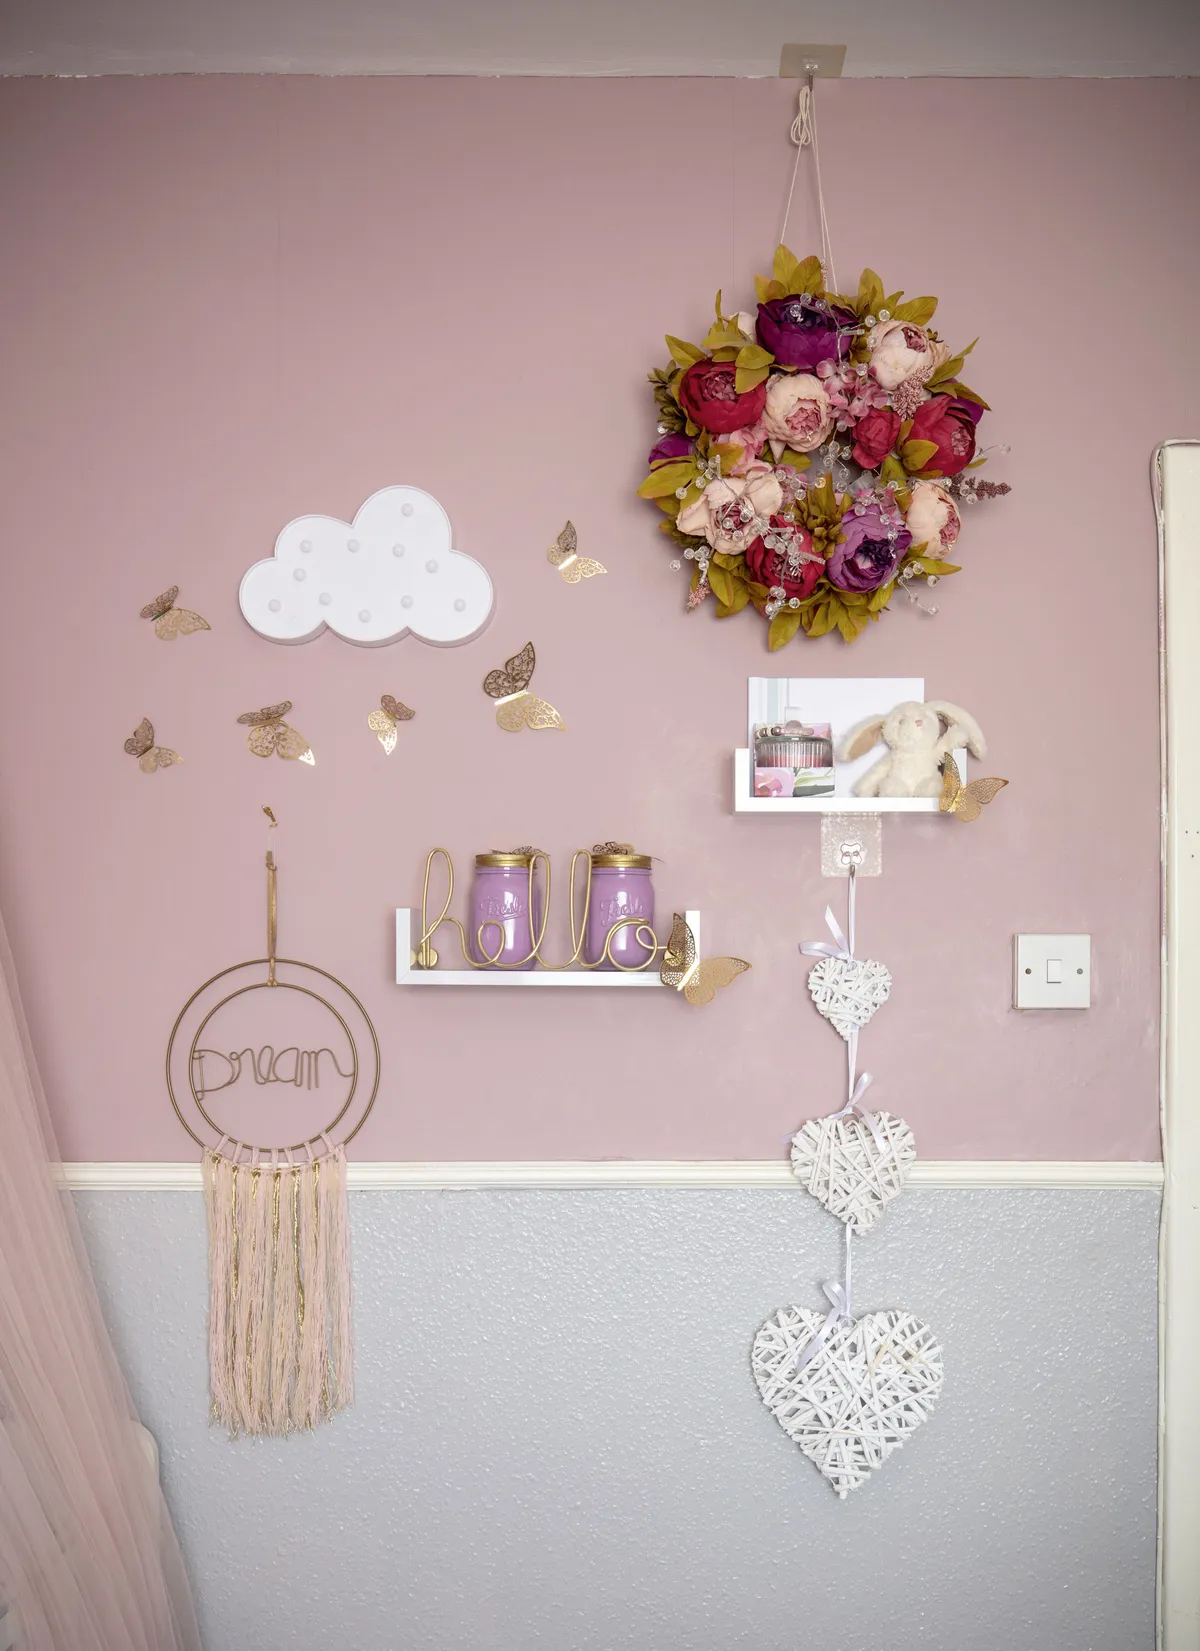 Alimah loves crafting, especially for her children’s rooms. She made the faux floral wreath for a whimsical touch. ‘I customised the jars with pink and gold paint to house cotton buds and hair bands, too,’ she says